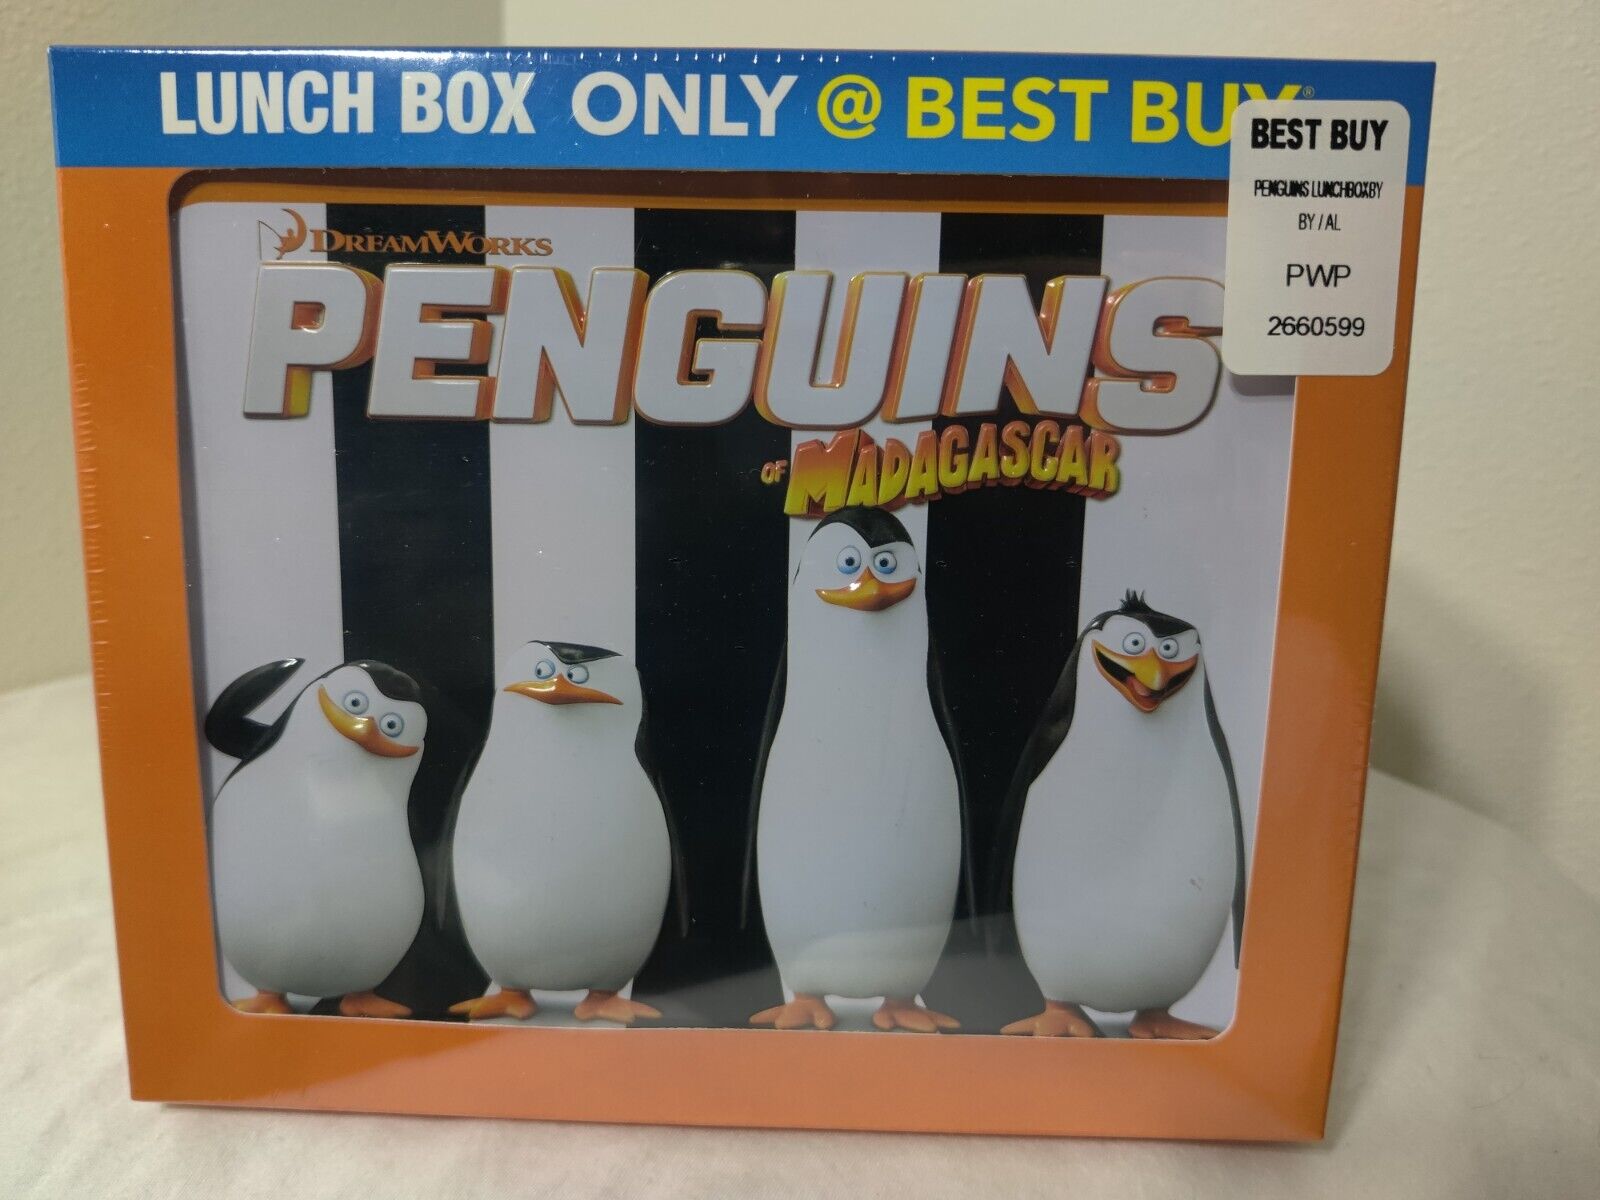 DreamWorks Penguins of Madagascar Lunch Box (best buy exclusive)